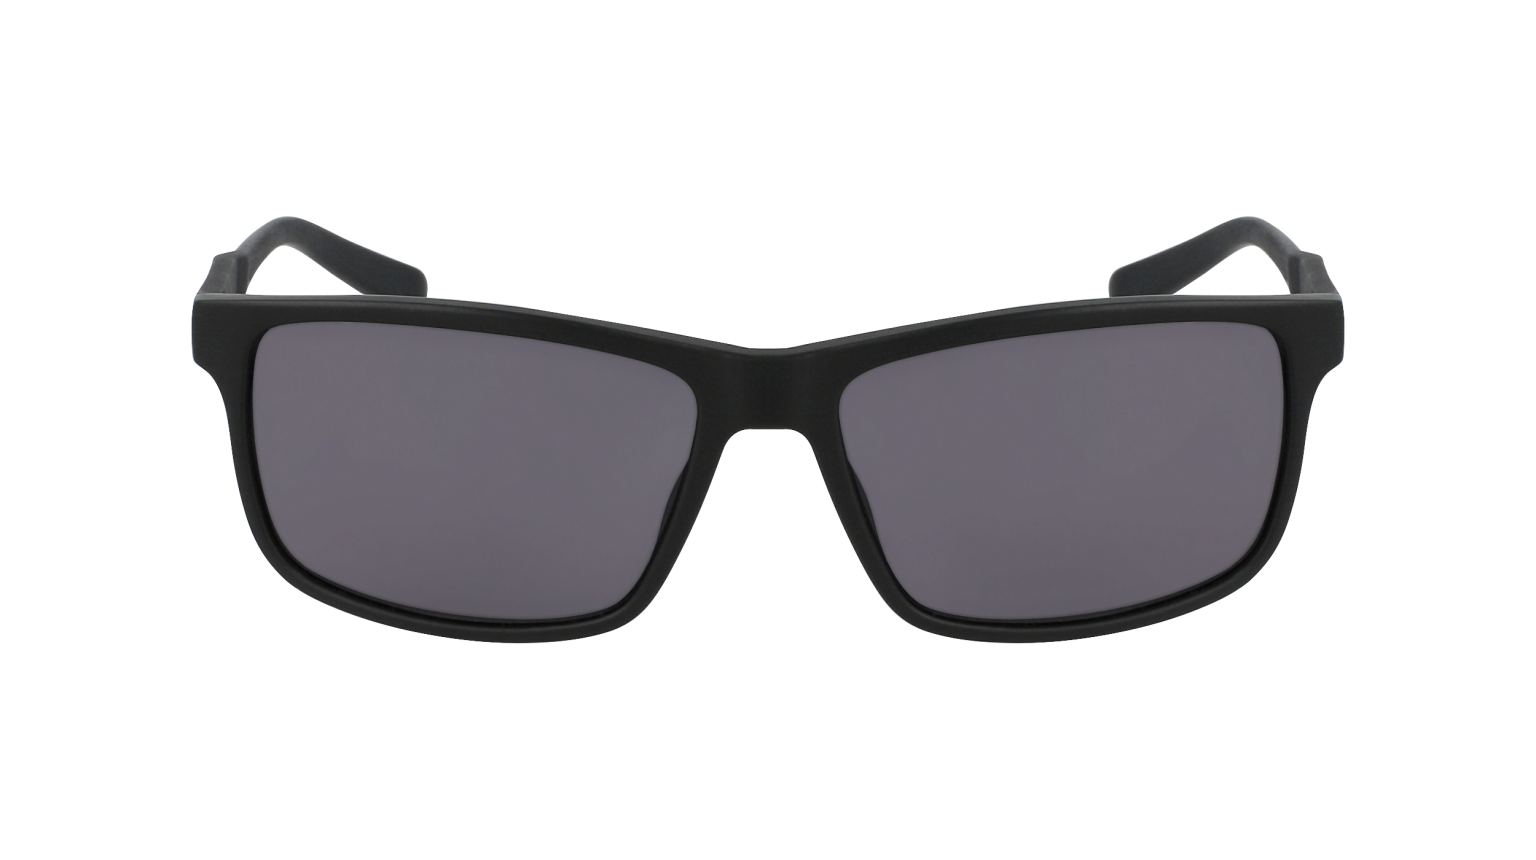 COUNT UPCYCLED - Matte Black with Lumalens Smoke Lens